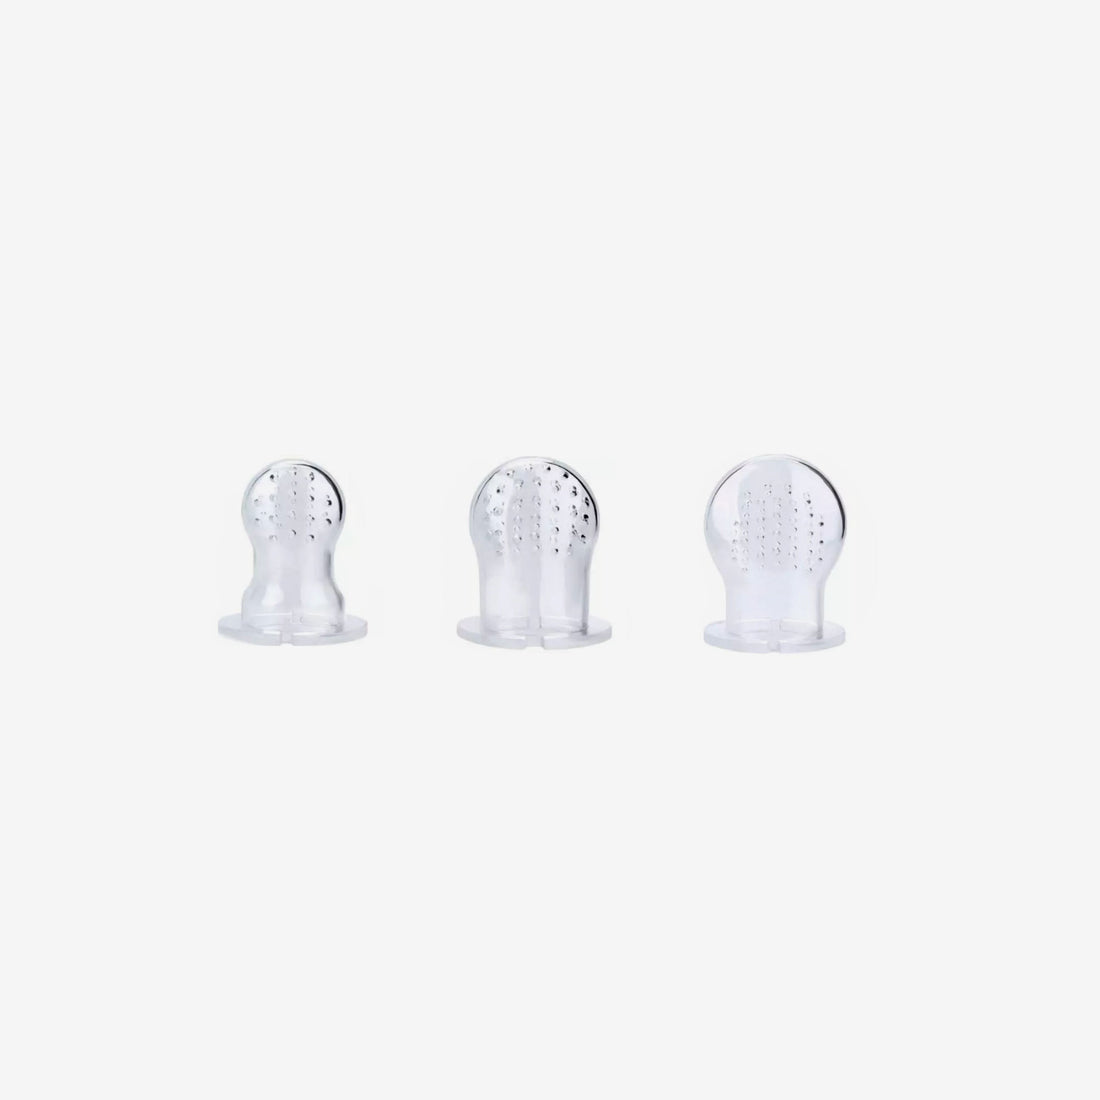 Silicone + rPET Mod Feeder - Set of 3 Tops